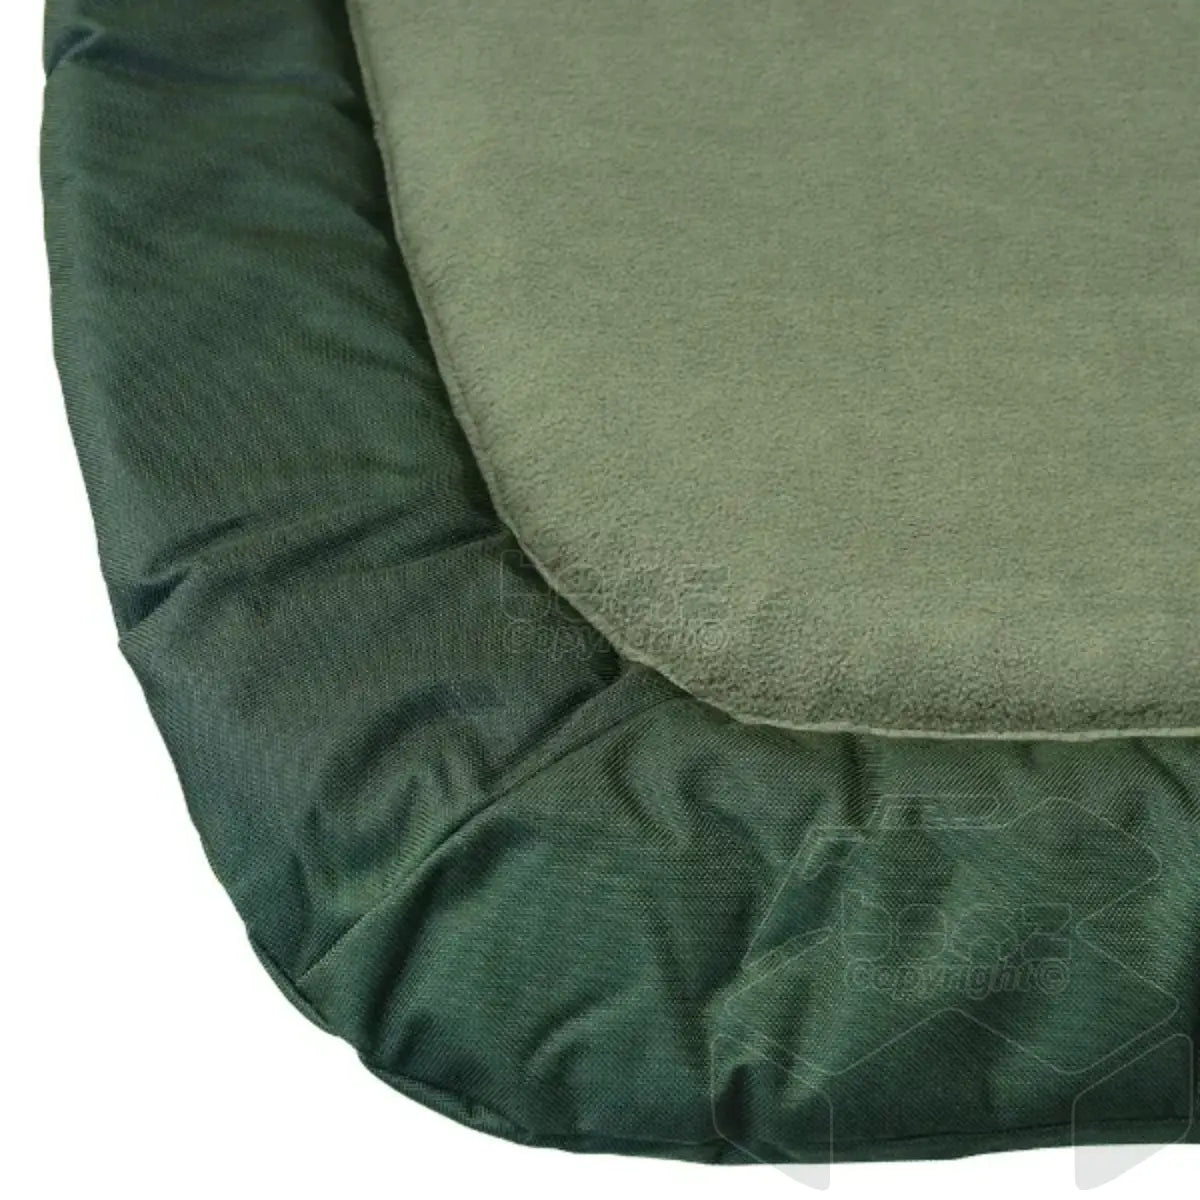 NGT Classic Bed - 6 Leg Bed Chair Fleece Lined with Recliner and Pillow